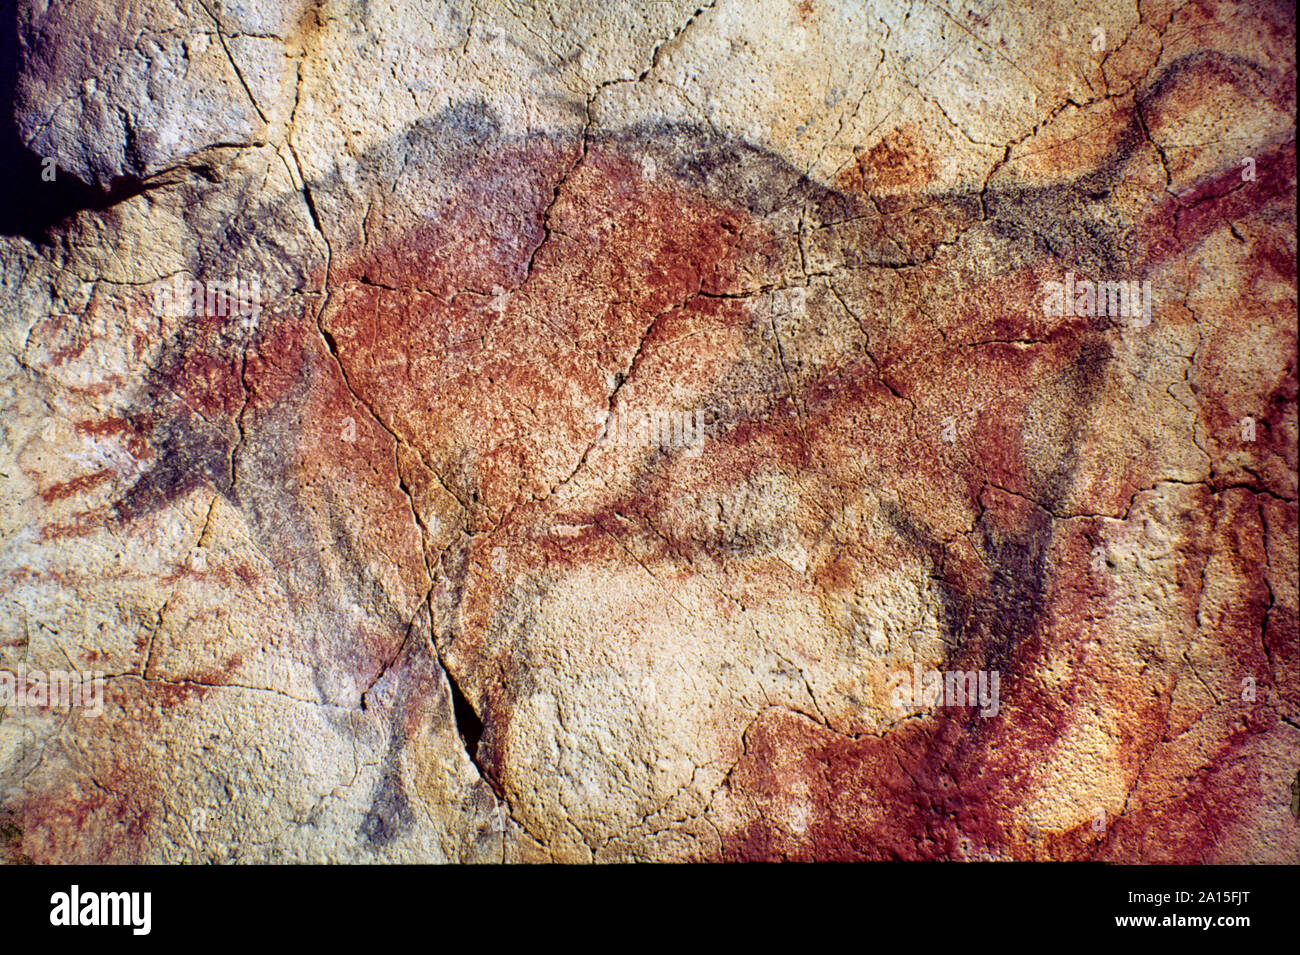 Bison, Altamira cave painting. Magdalenian period, 15000-12000 BC Spain Stock Photo